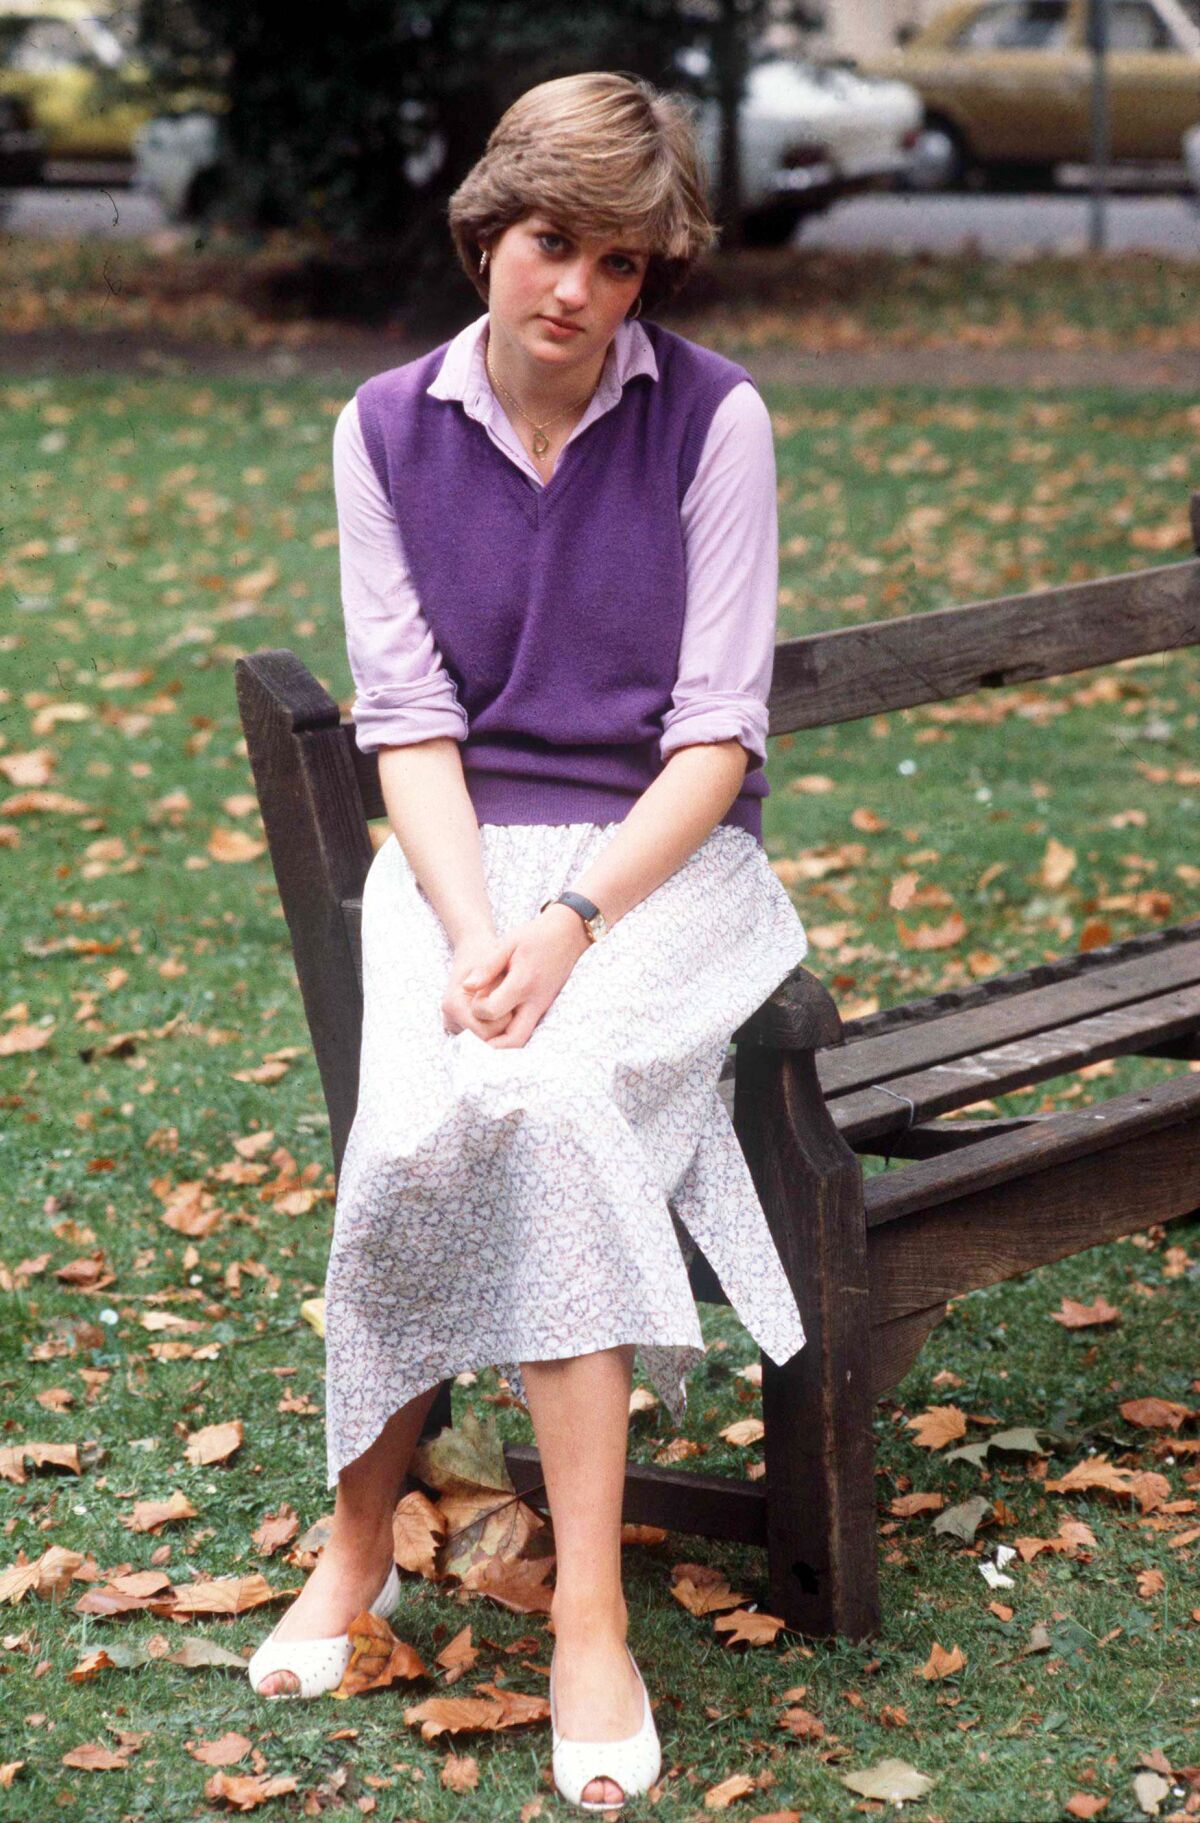 September 1980: Lady Diana Spencer dressed in the unremarkable style of the stereotypical Sloane Ranger.